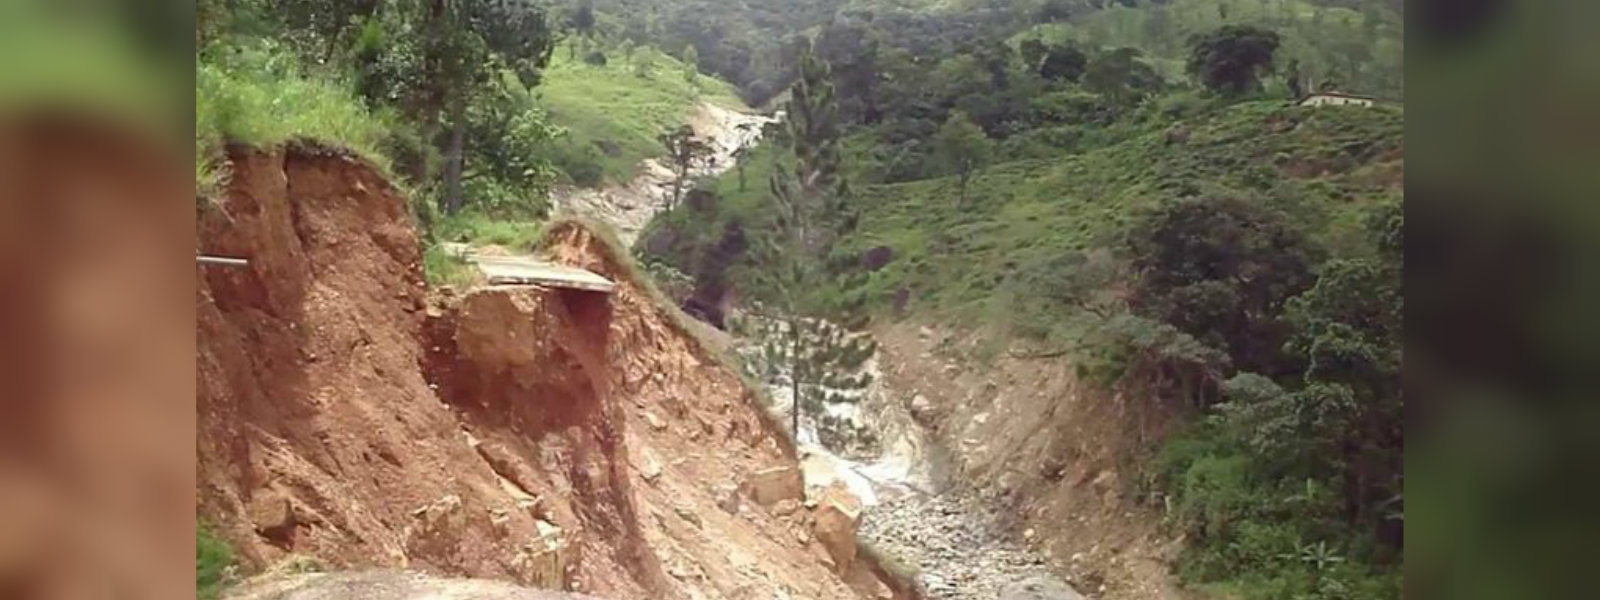 Landslide Early Warning for several areas